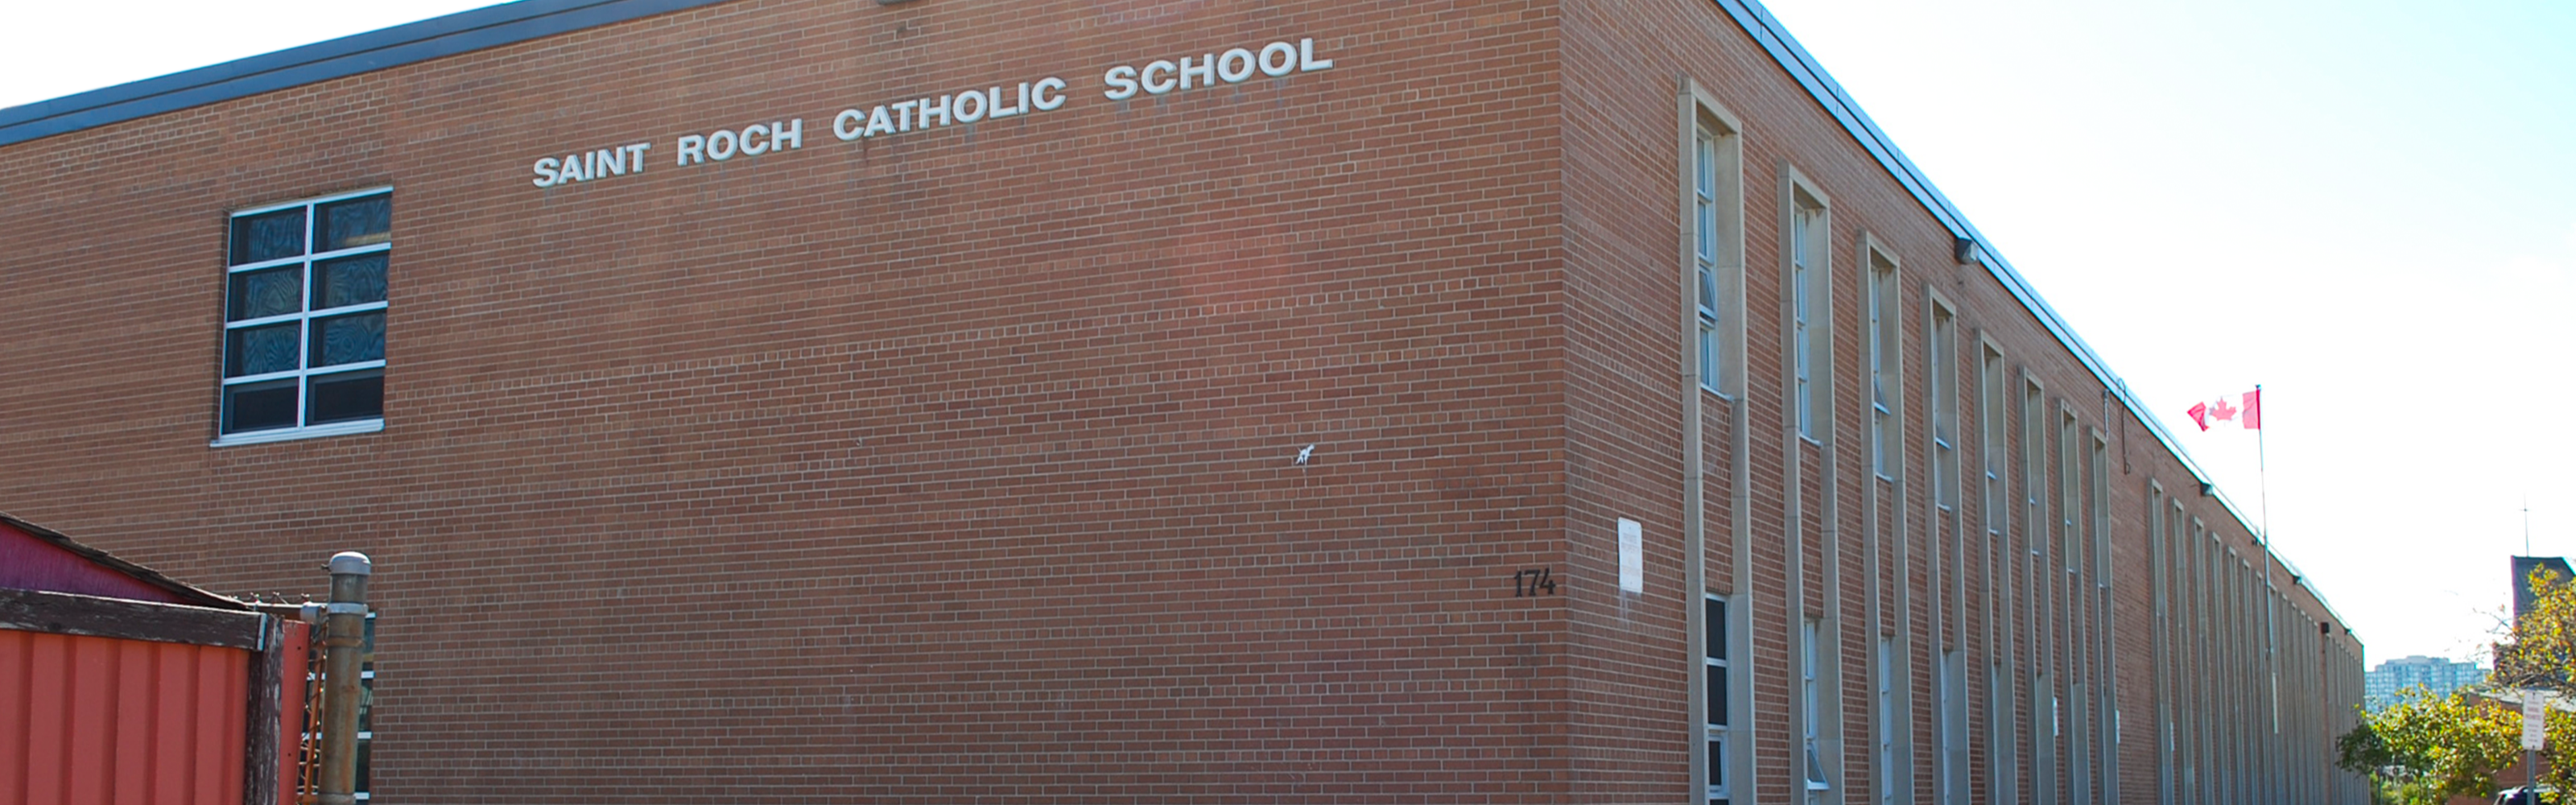 The front of the St. Roch Catholic School building.